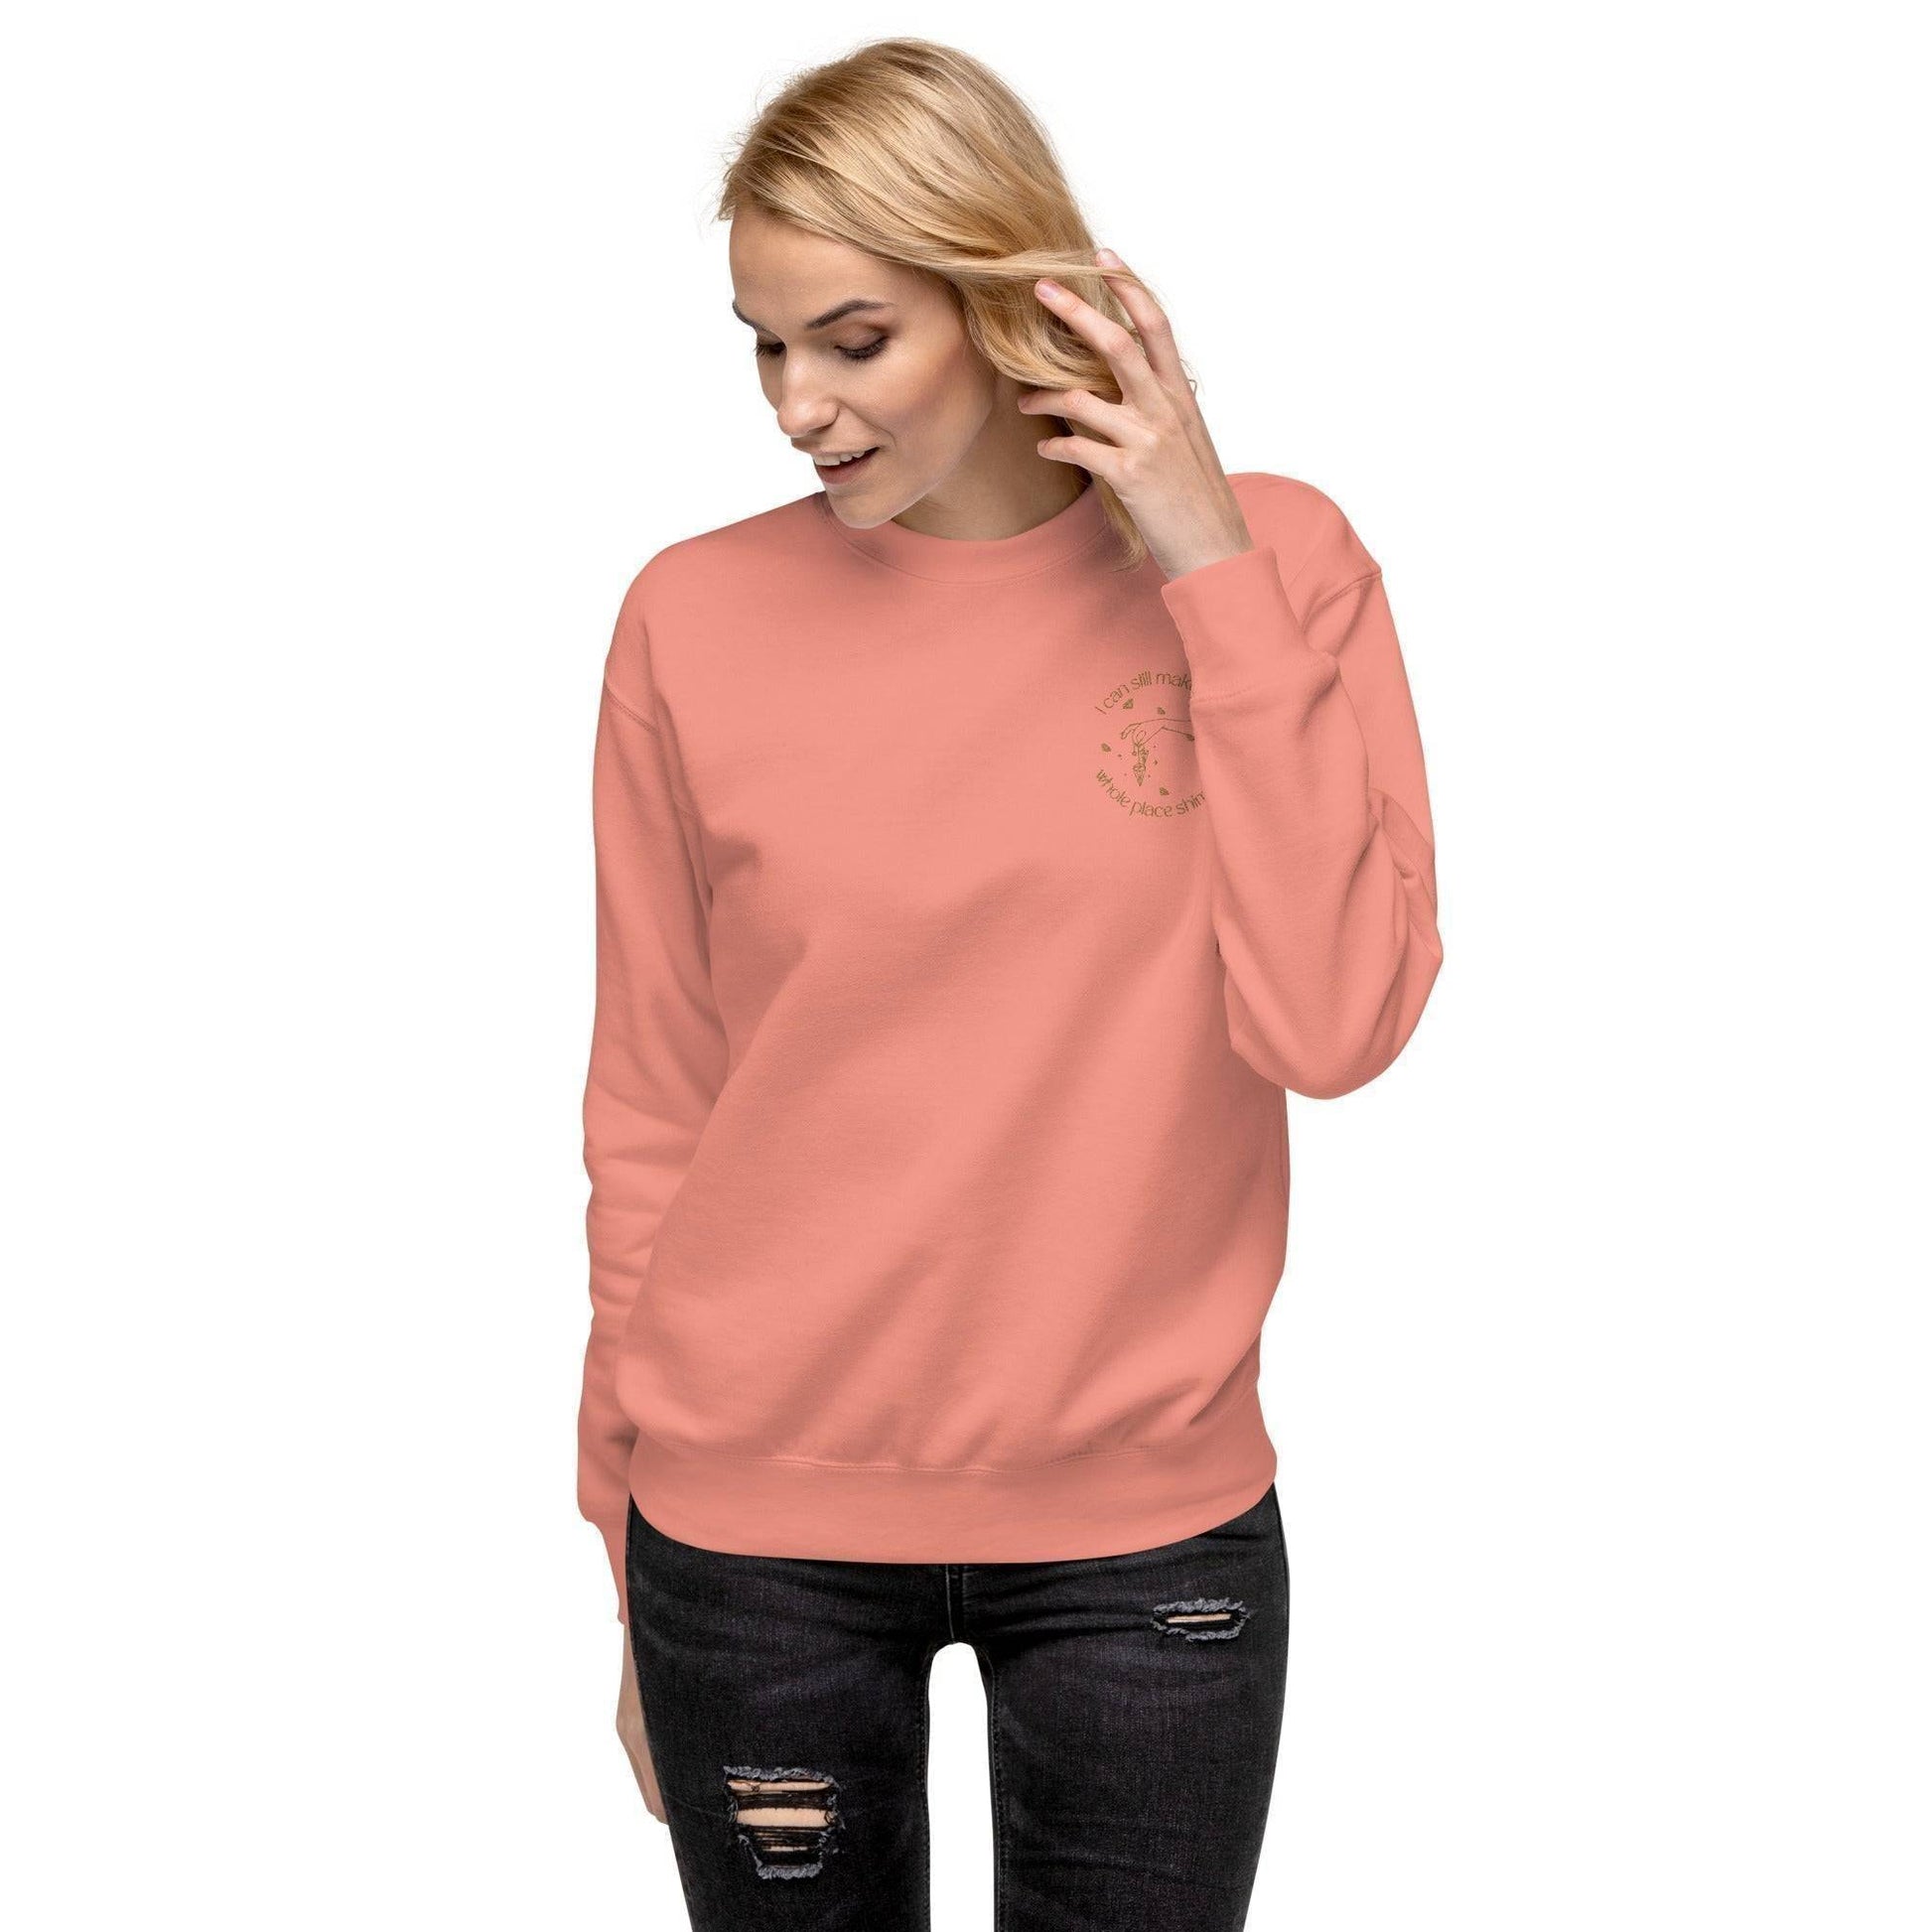 Taylor Swift Bejeweled Embroidered Sweatshirt Dusty Rose